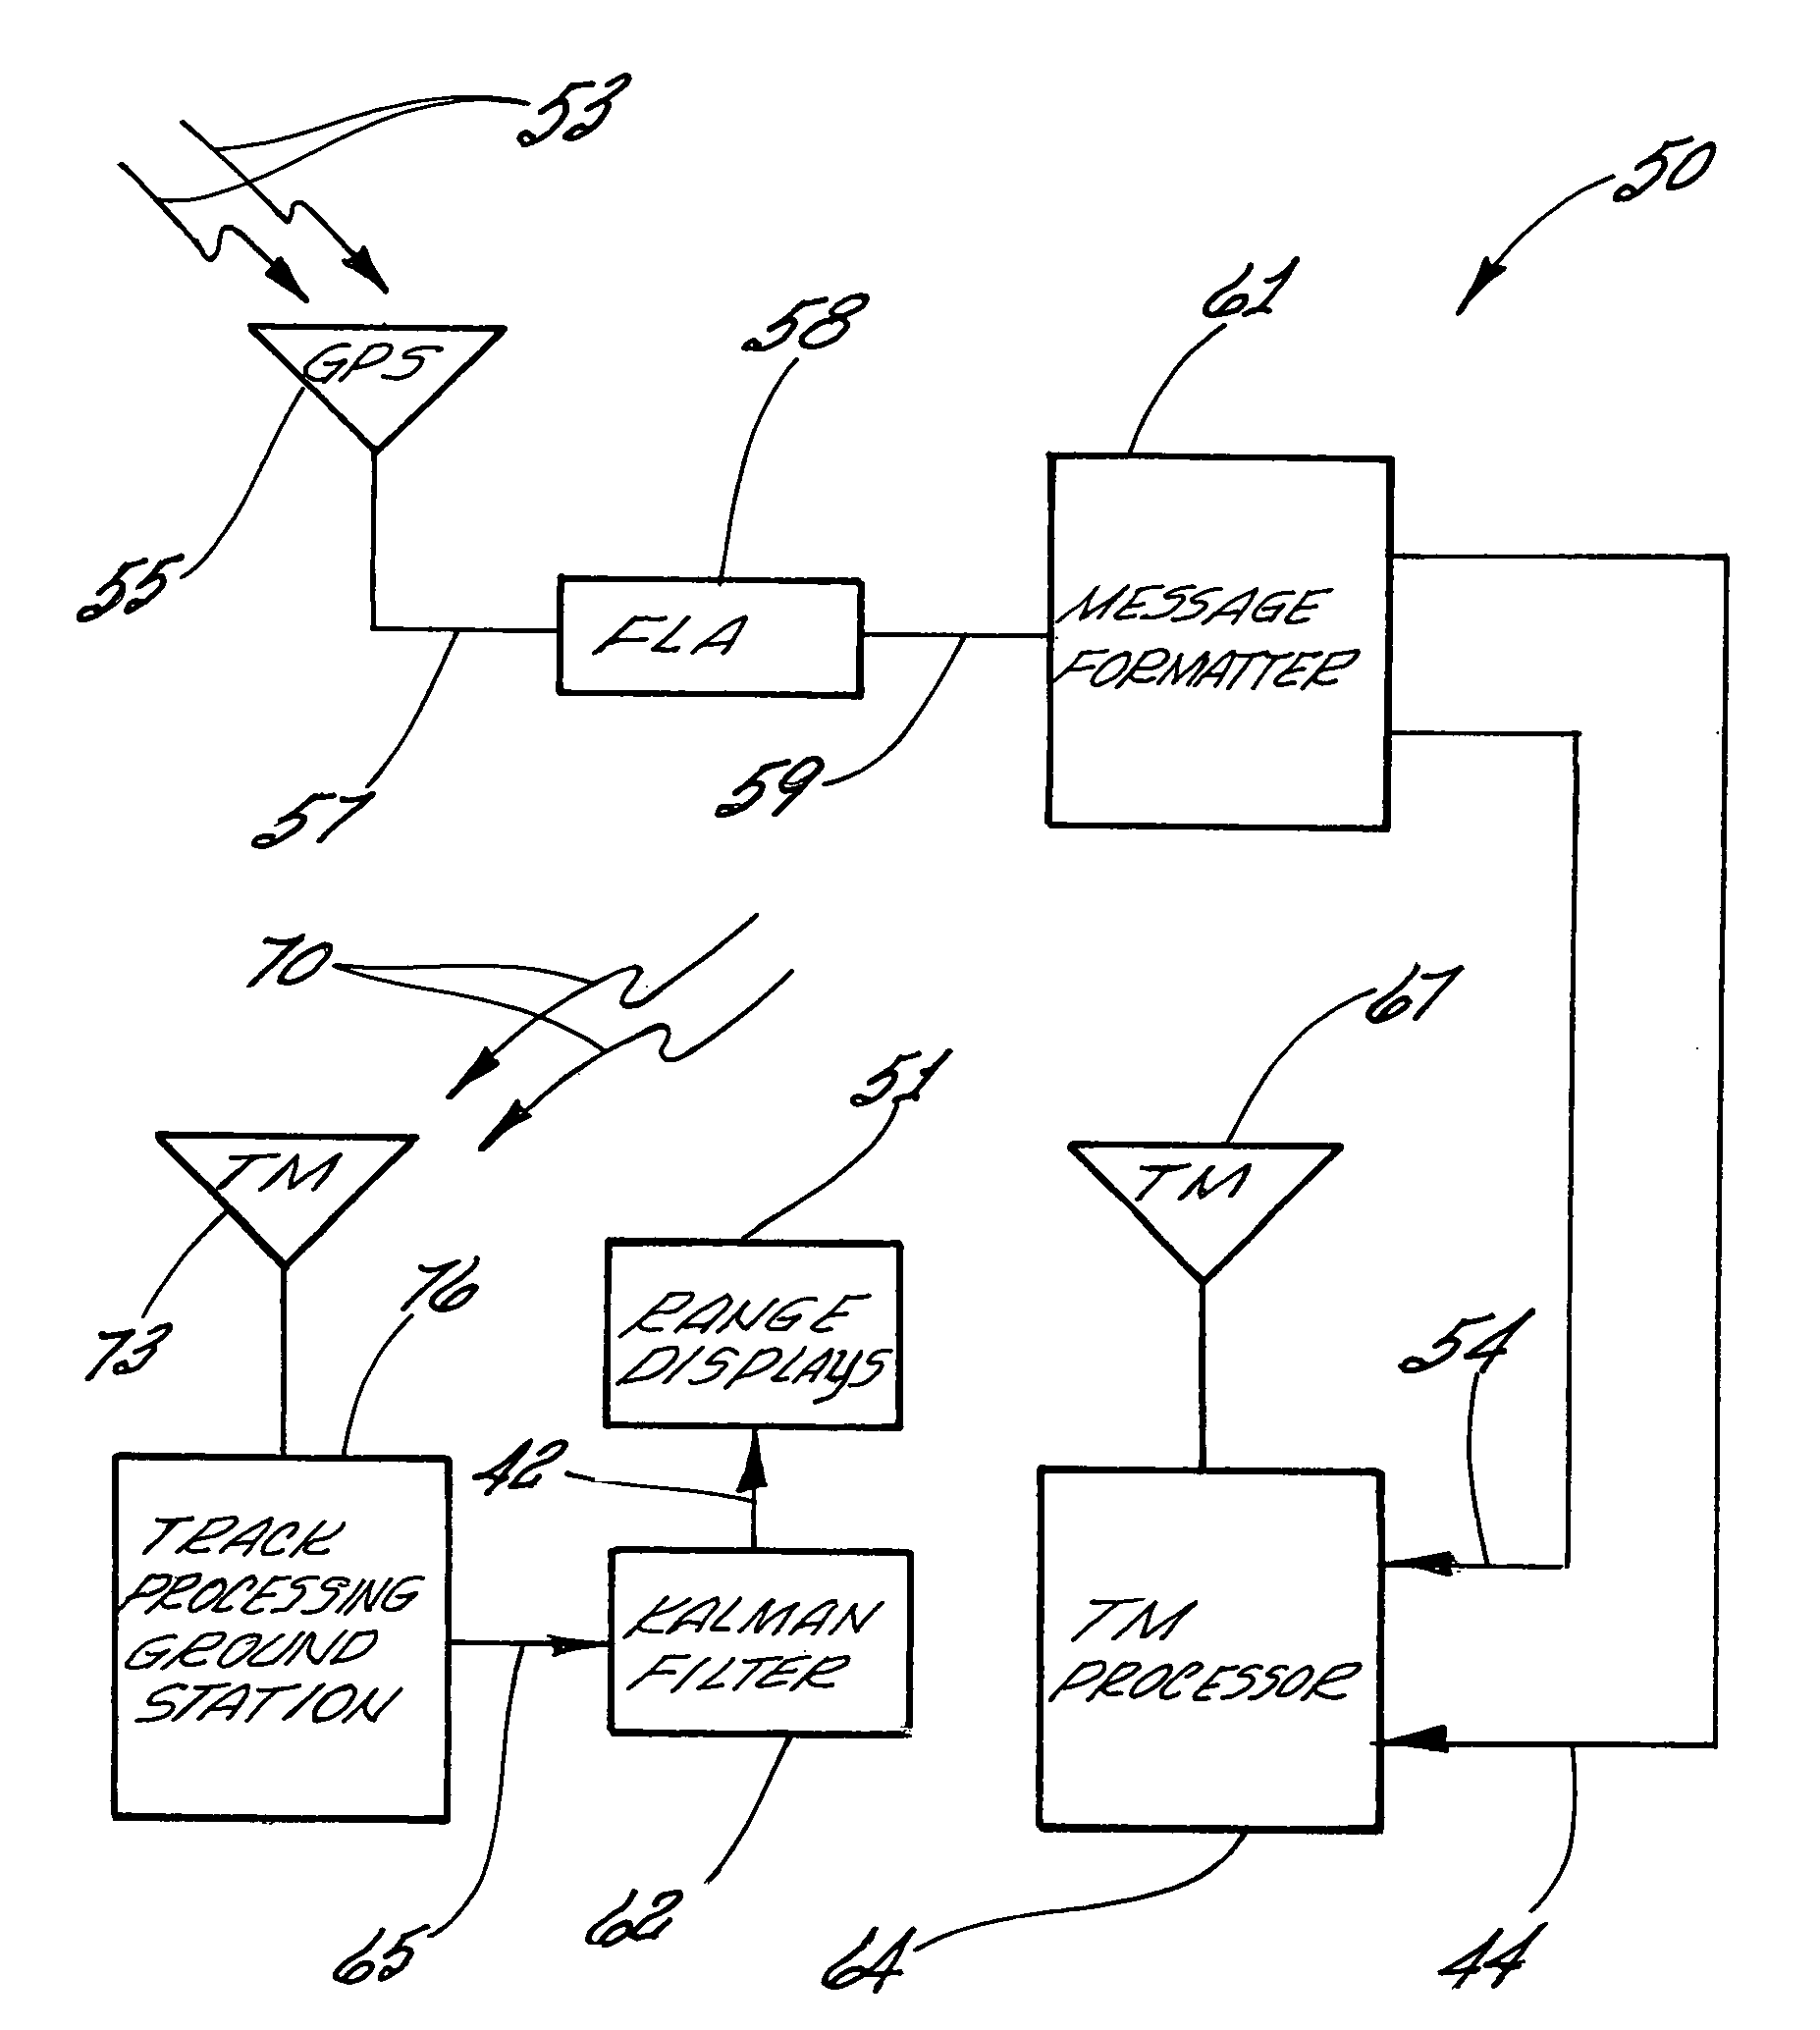 Message formatting system to improve GPS and IMU positional reporting for a vehicle